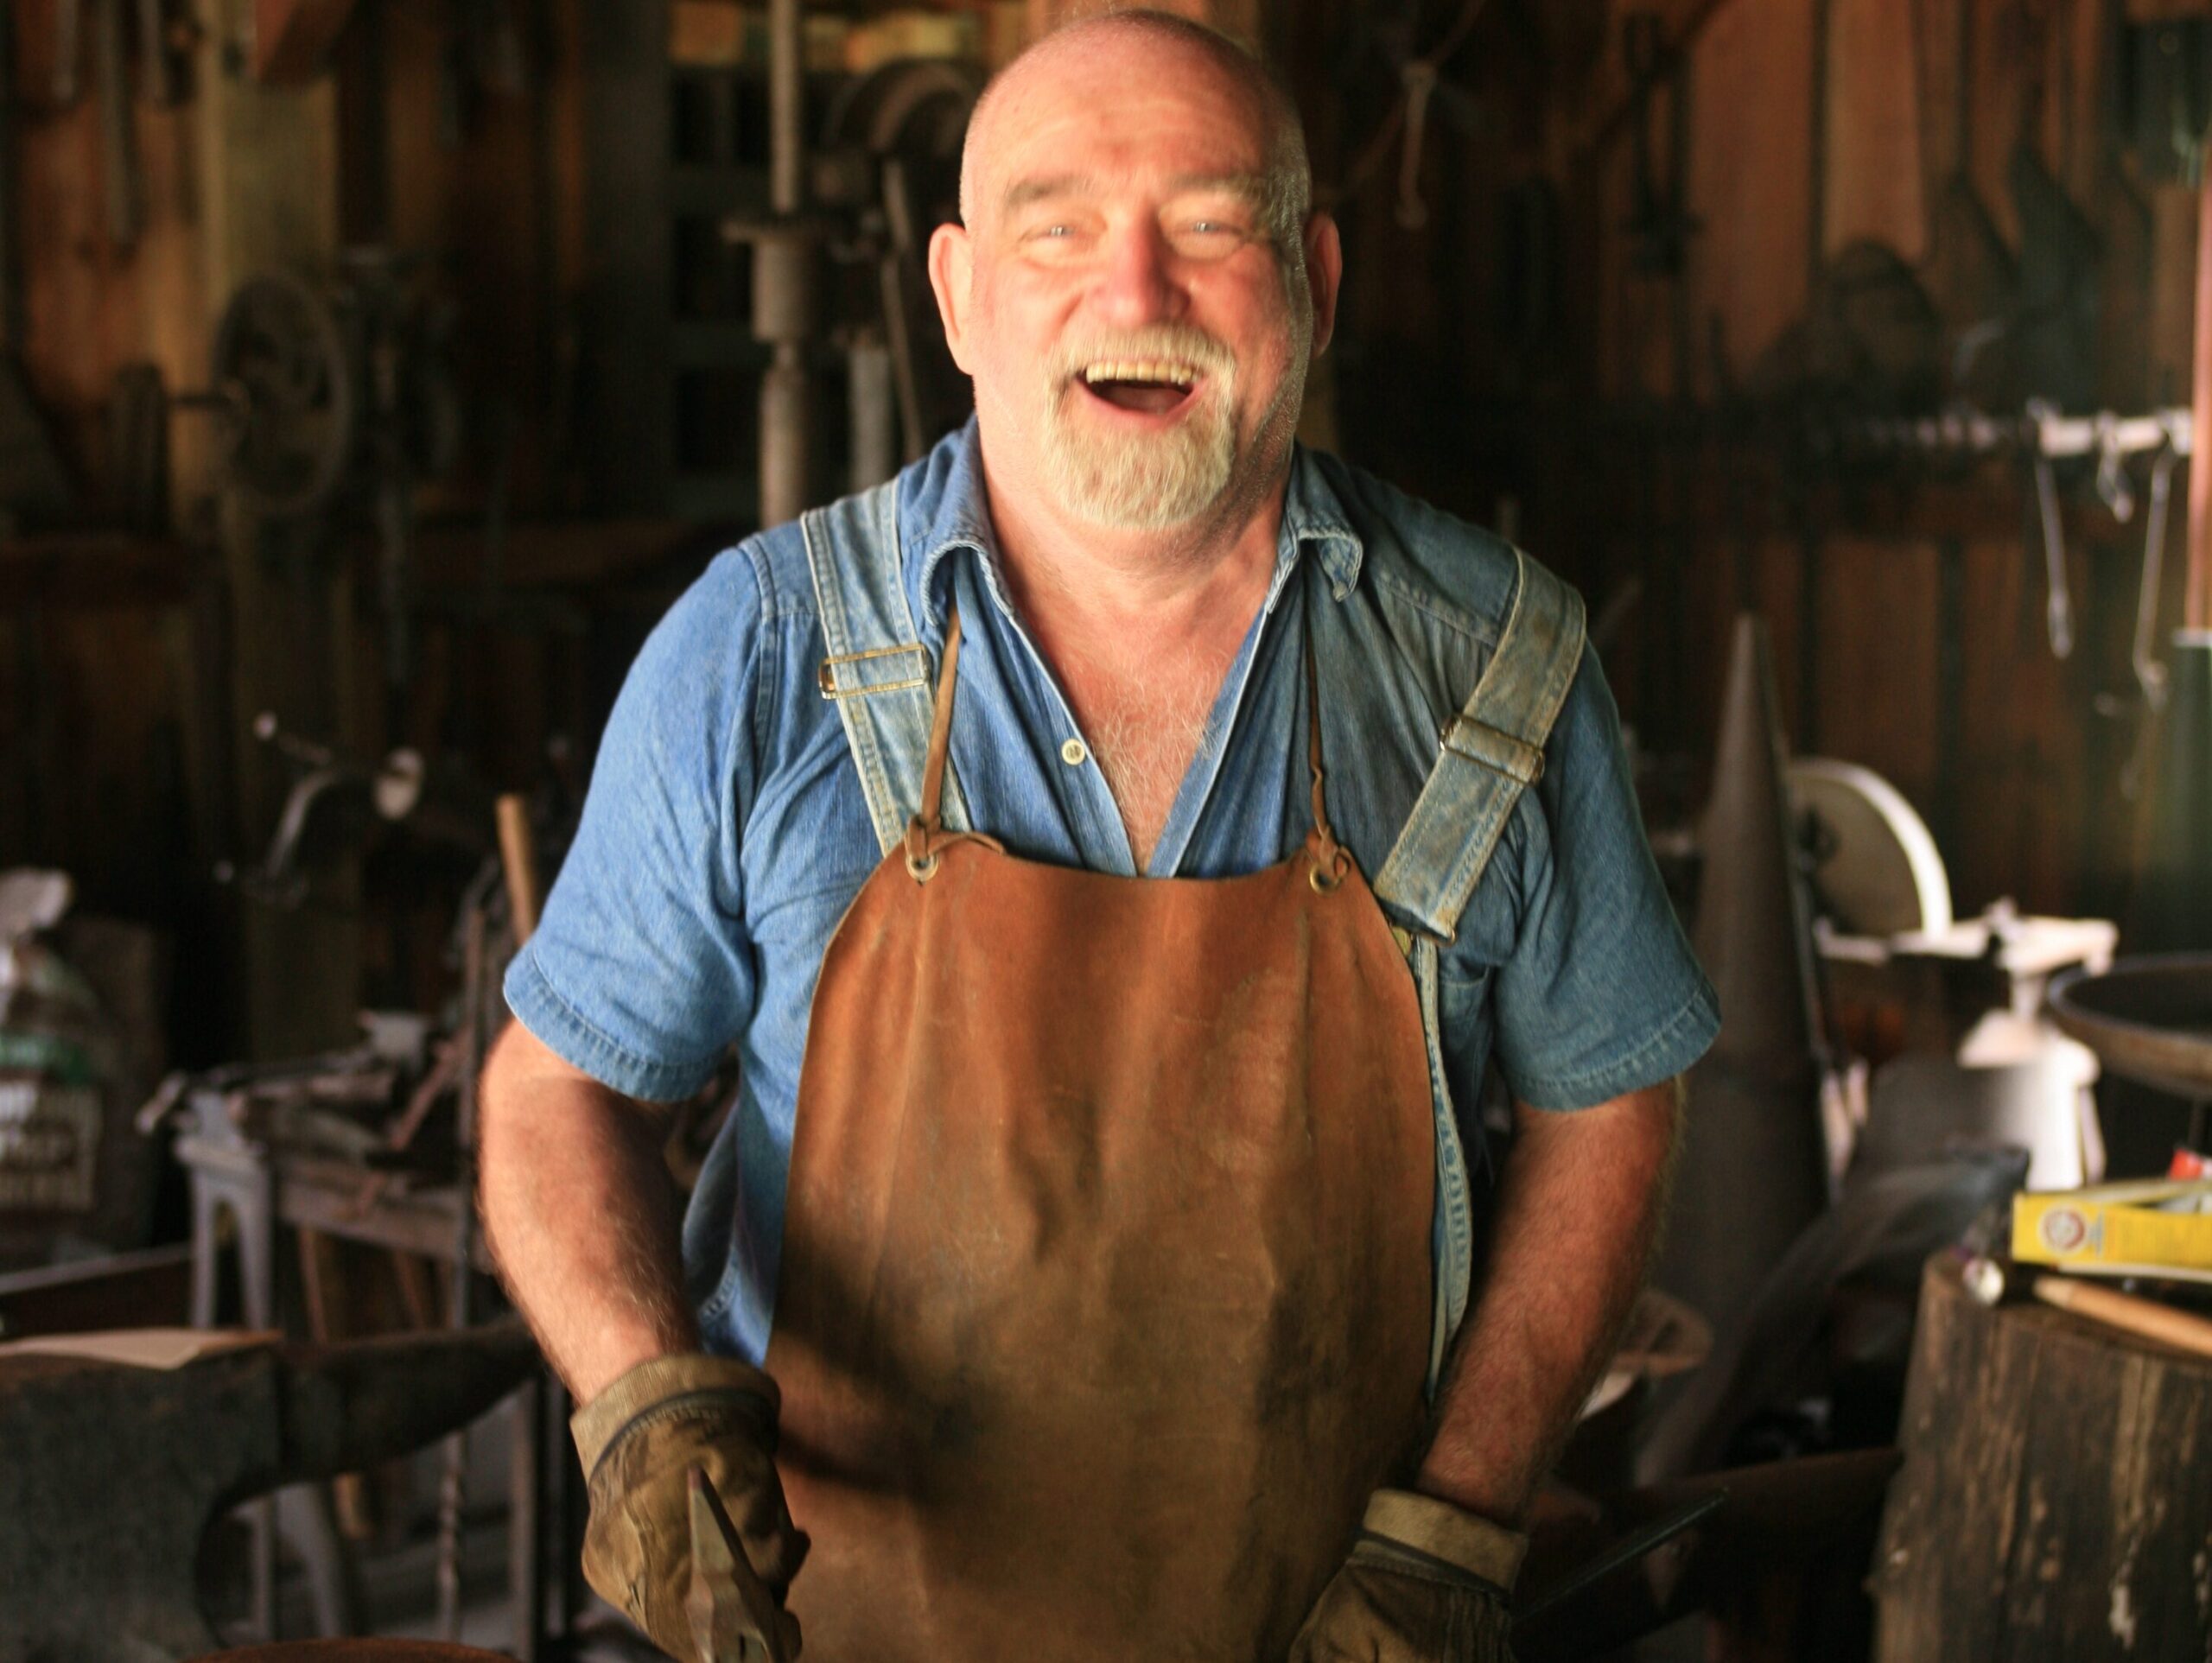 A blacksmith, man, laughs, happily at the camera while working a piece of metal during his employment. 